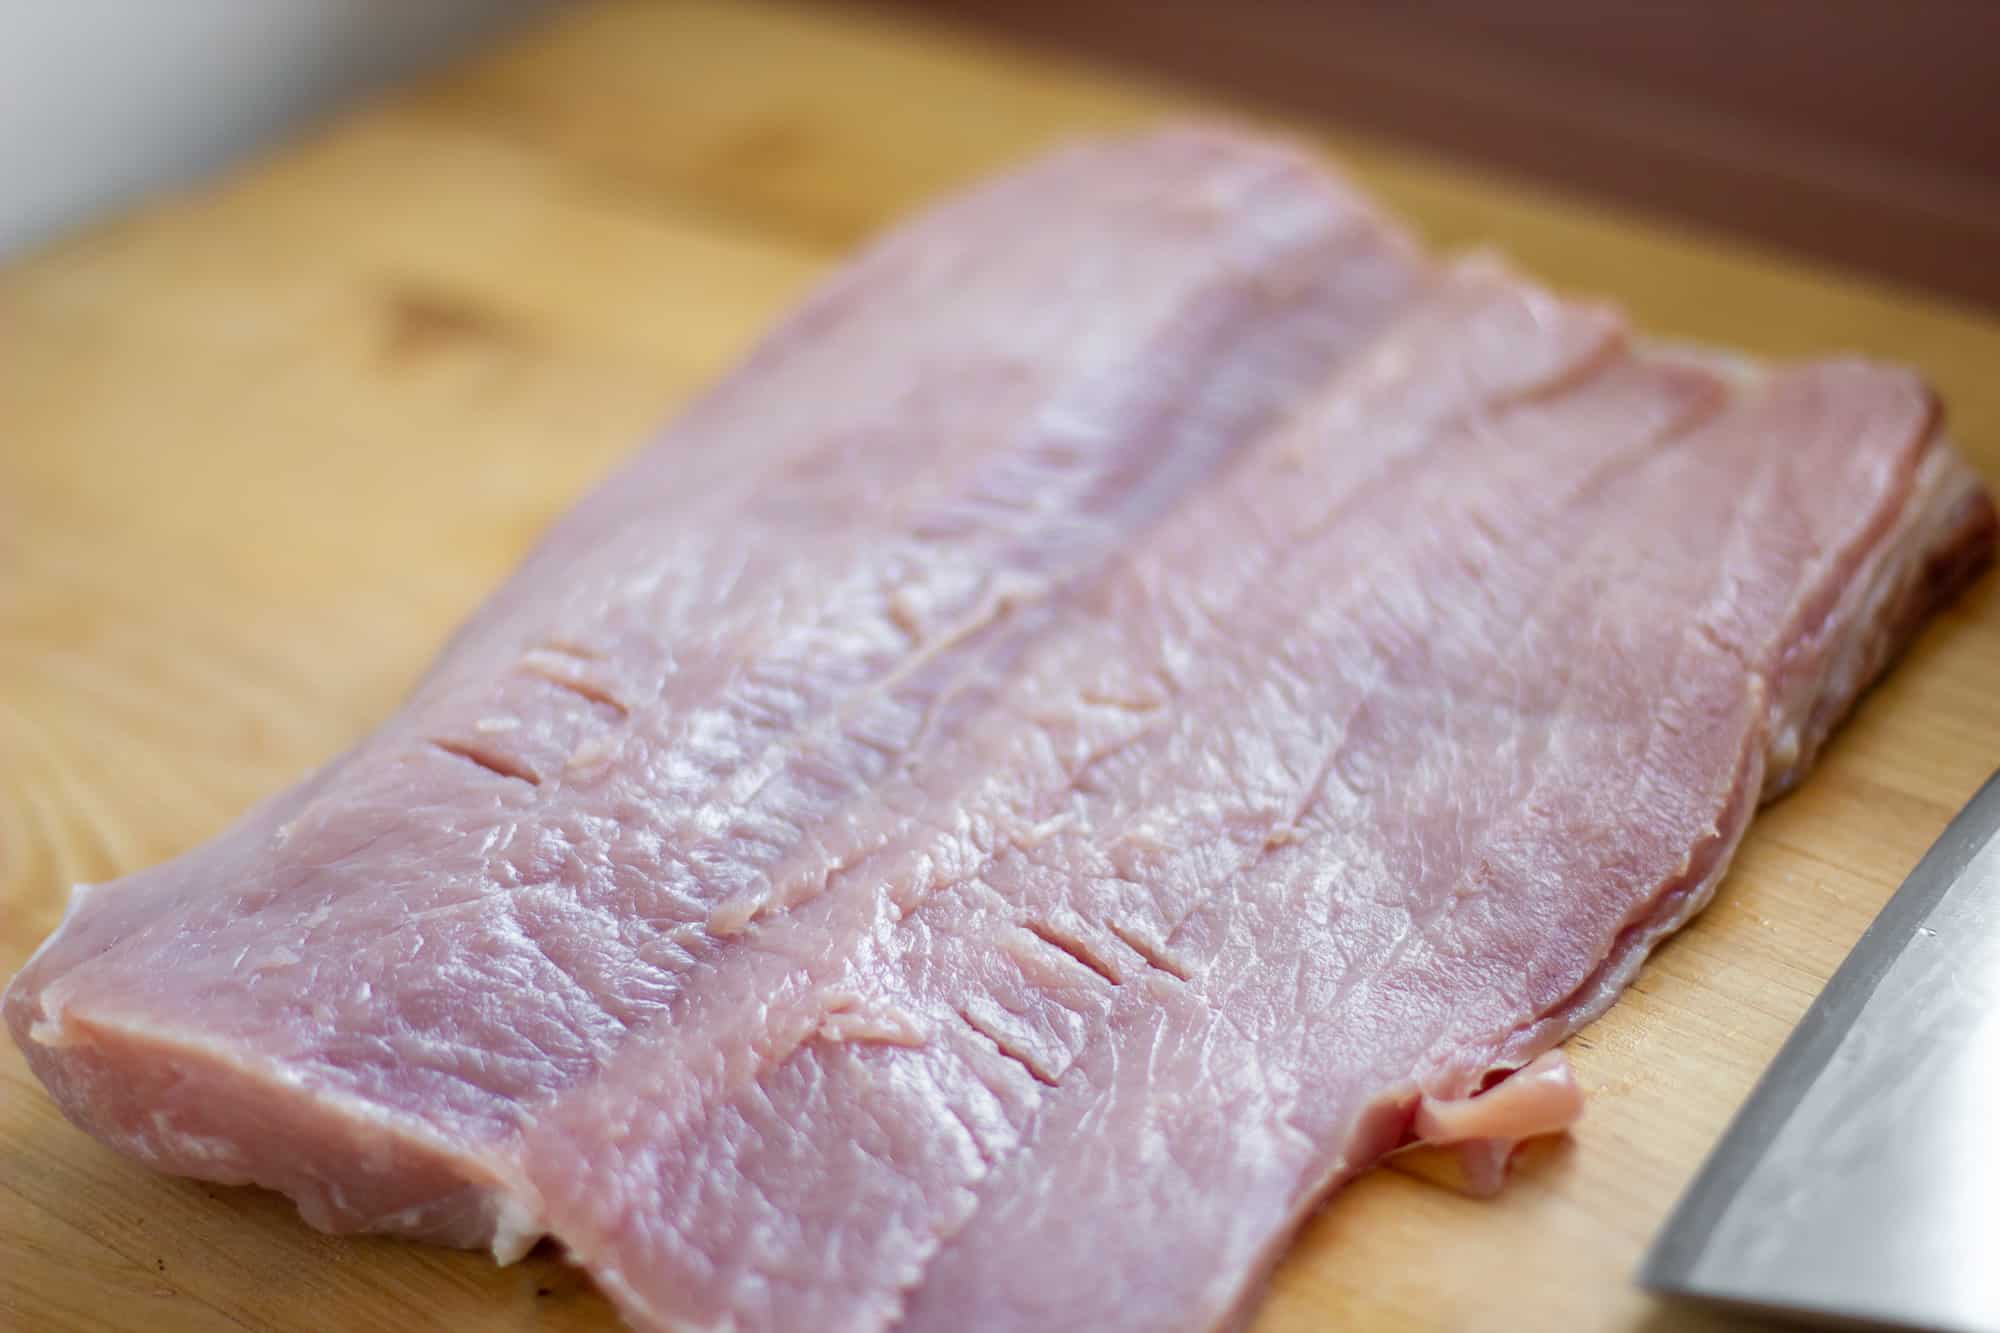 Trim the pork loin of any excess fat and butterfly it with a sharp knife.